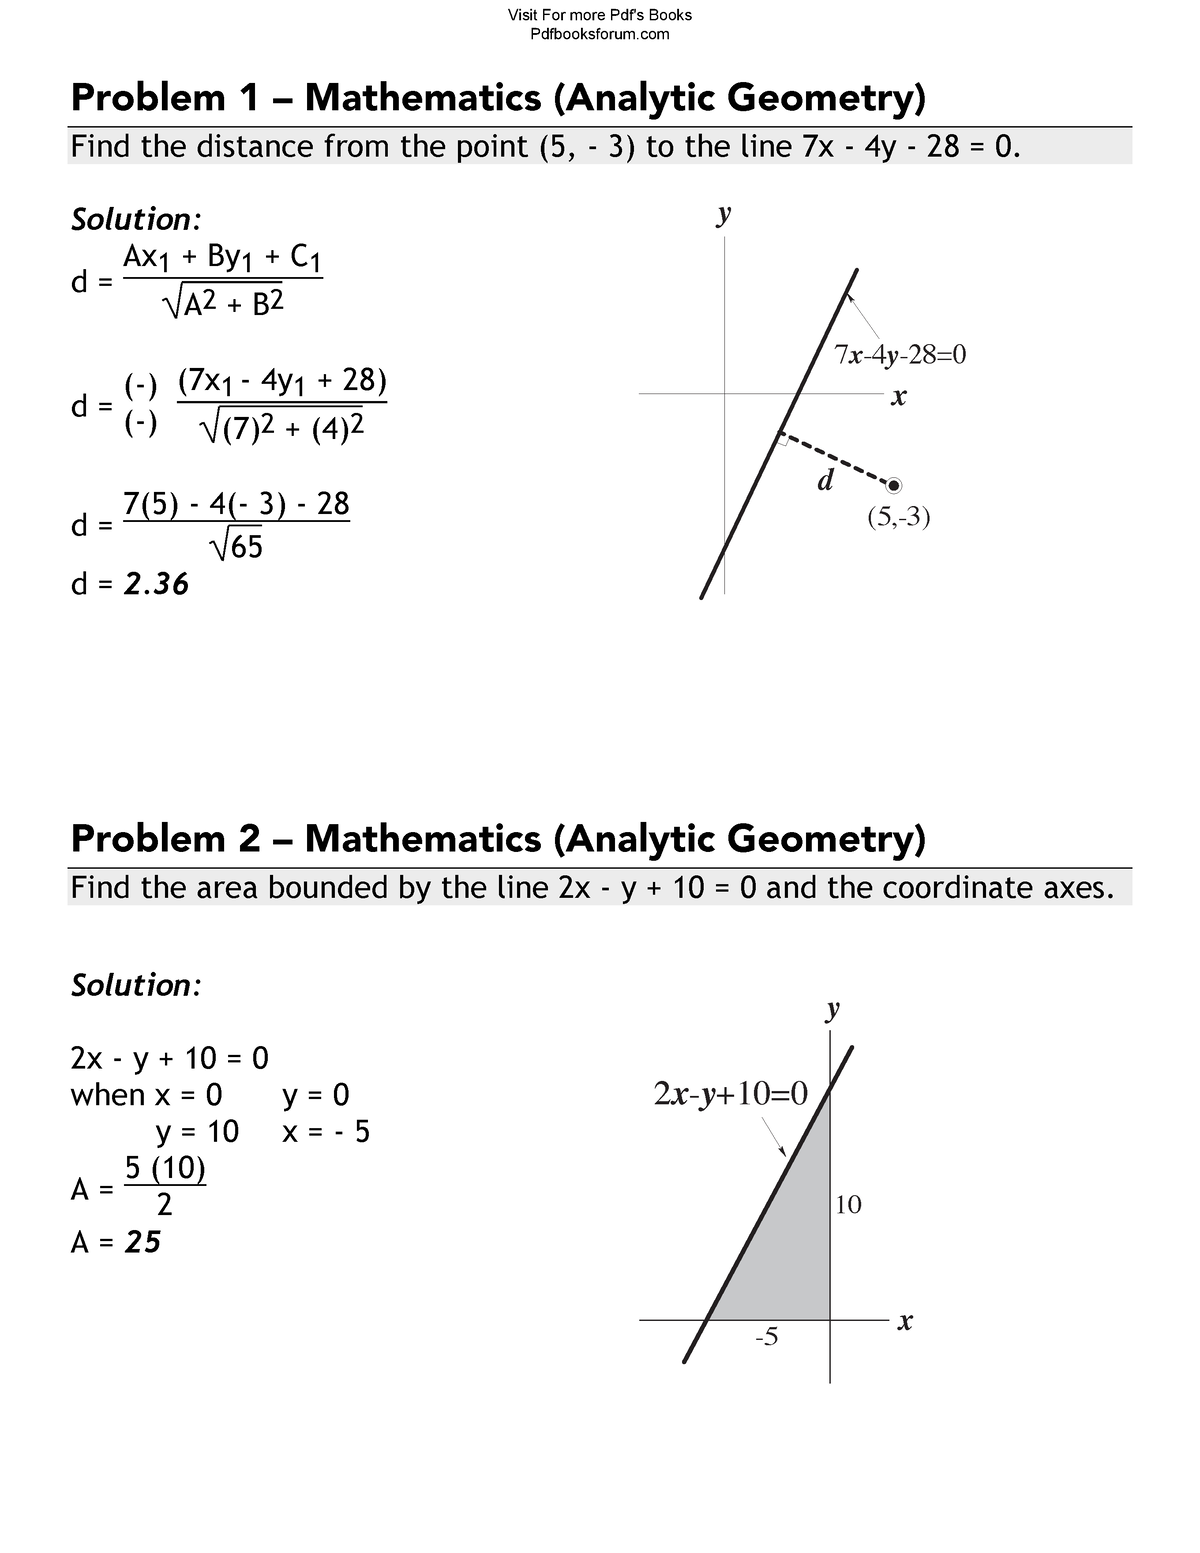 analytic-geometry-problems-with-solutions-problem-1-mathematics